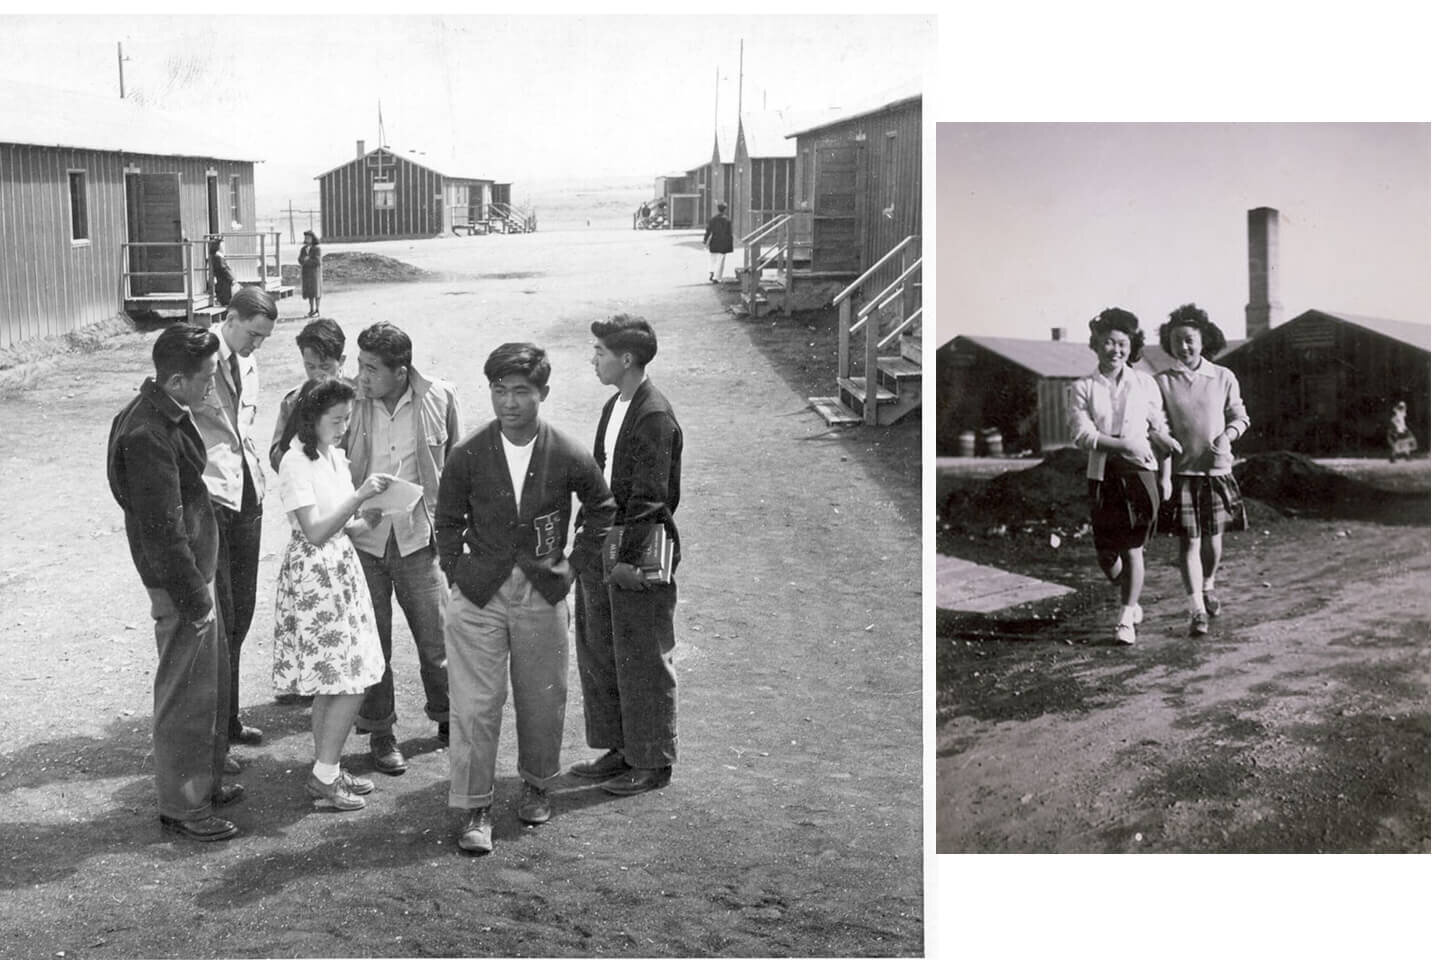 Historical photograph of Japanese people living in camp